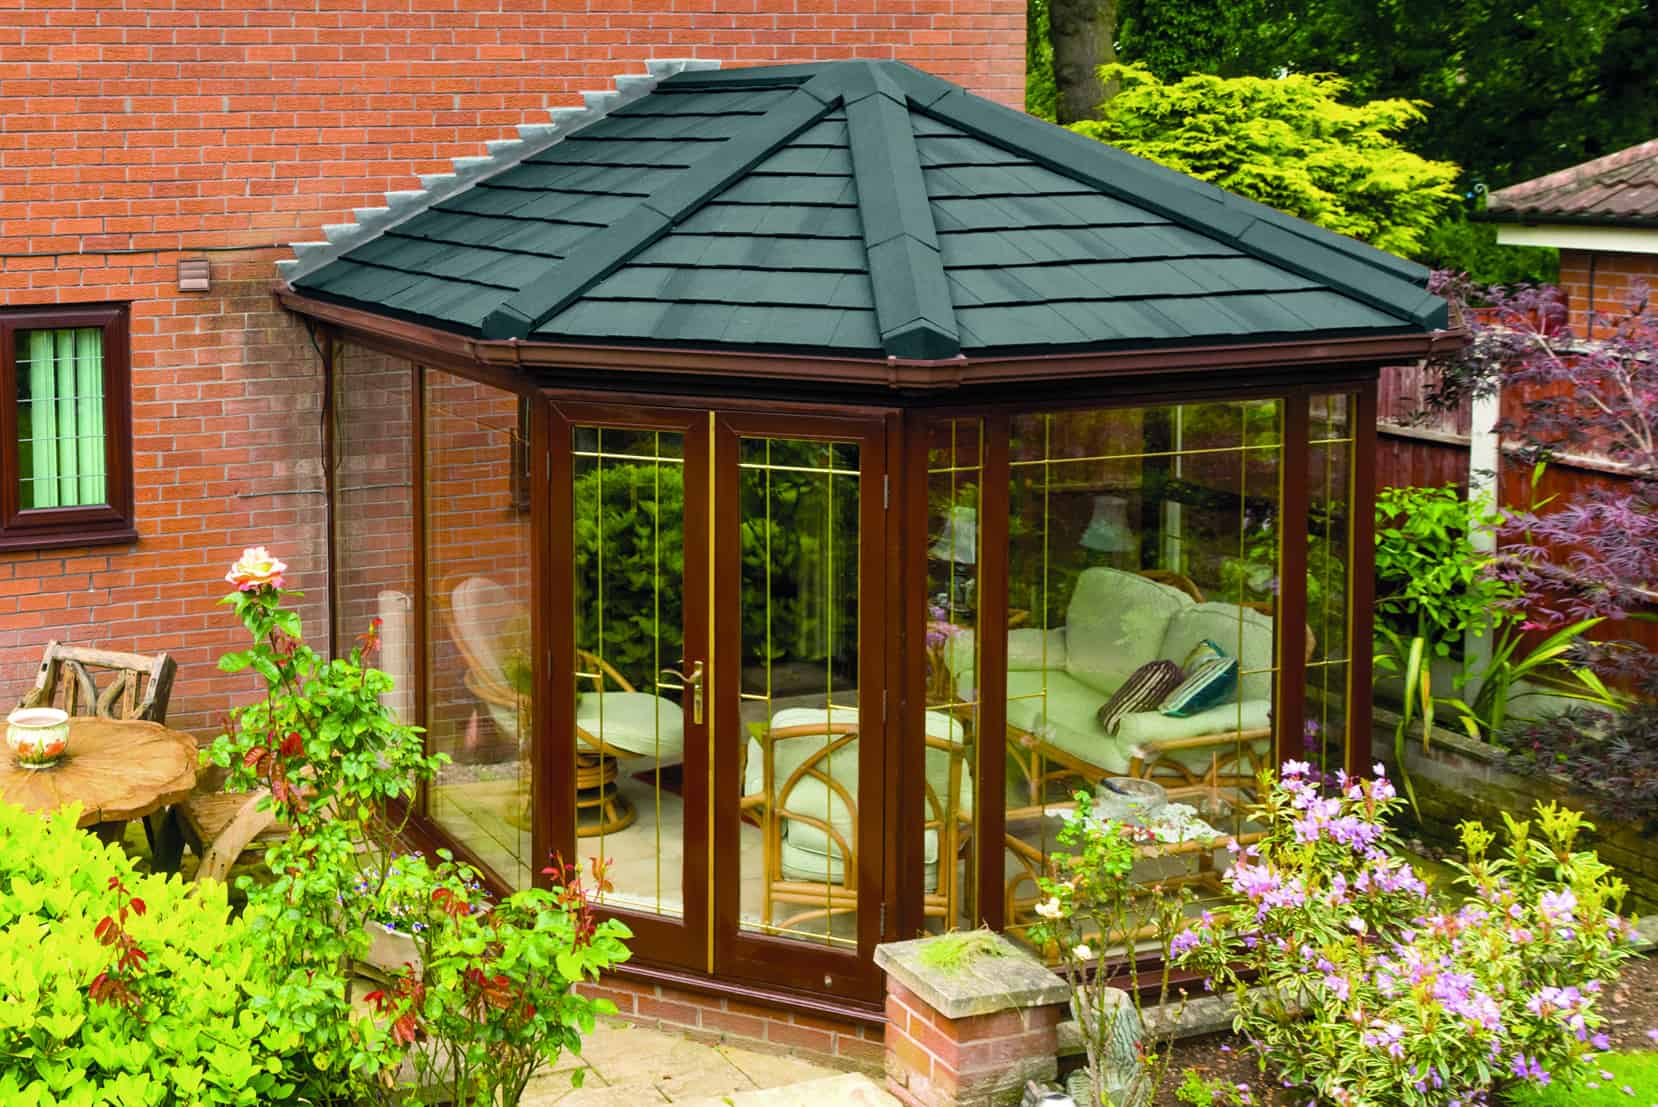 Upgrade Your Conservatory With a Tiled Conservatory Roof